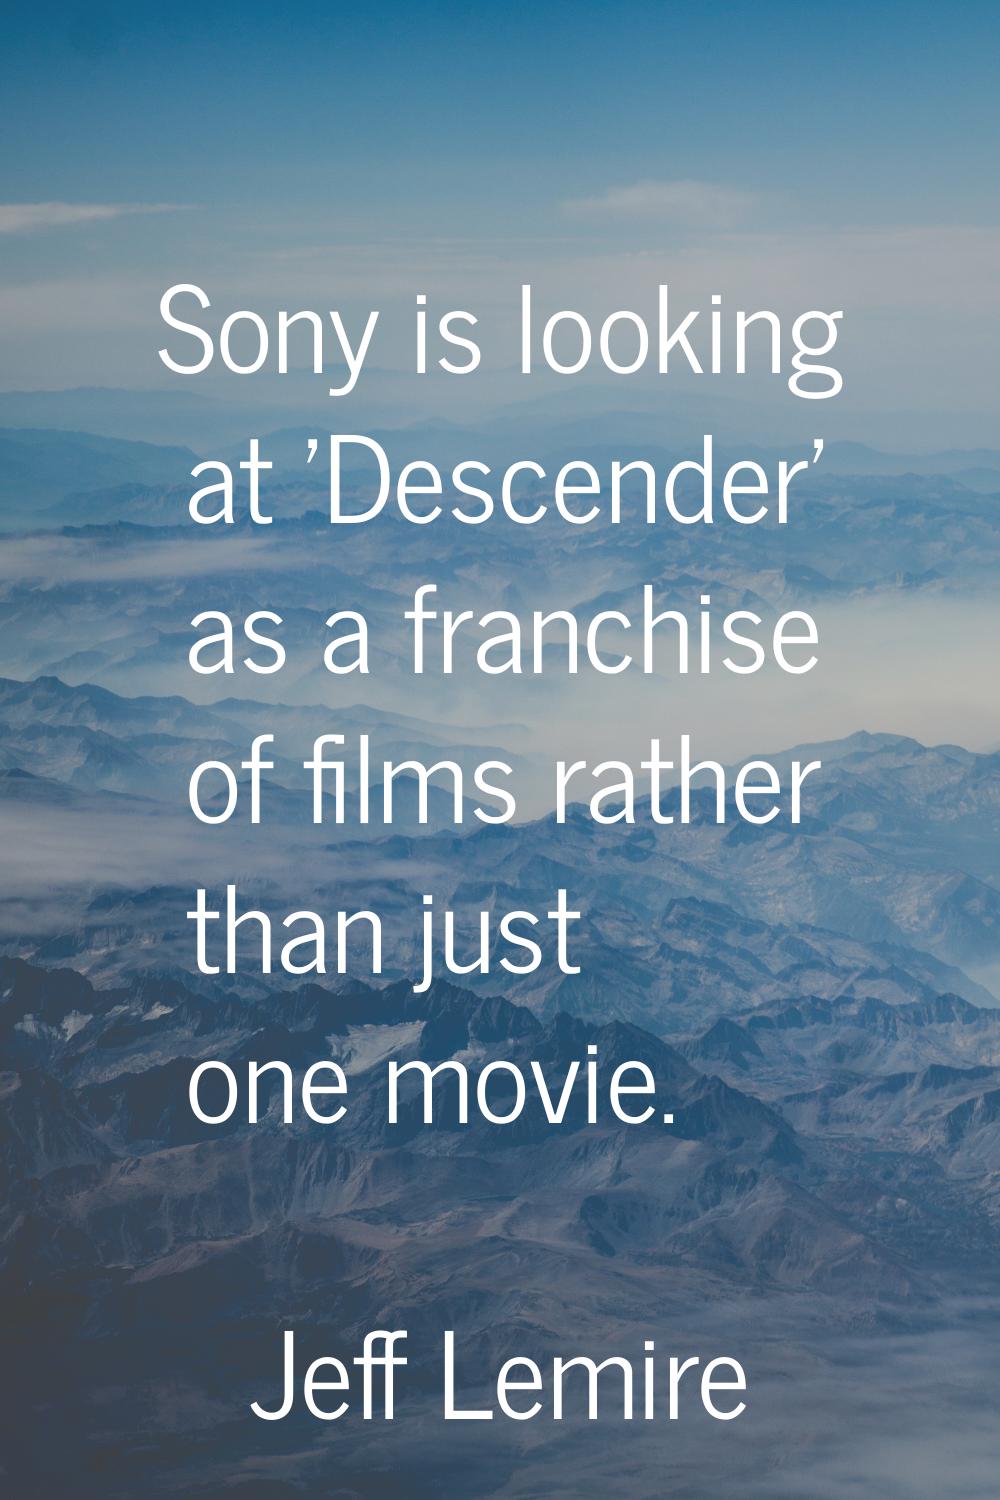 Sony is looking at 'Descender' as a franchise of films rather than just one movie.